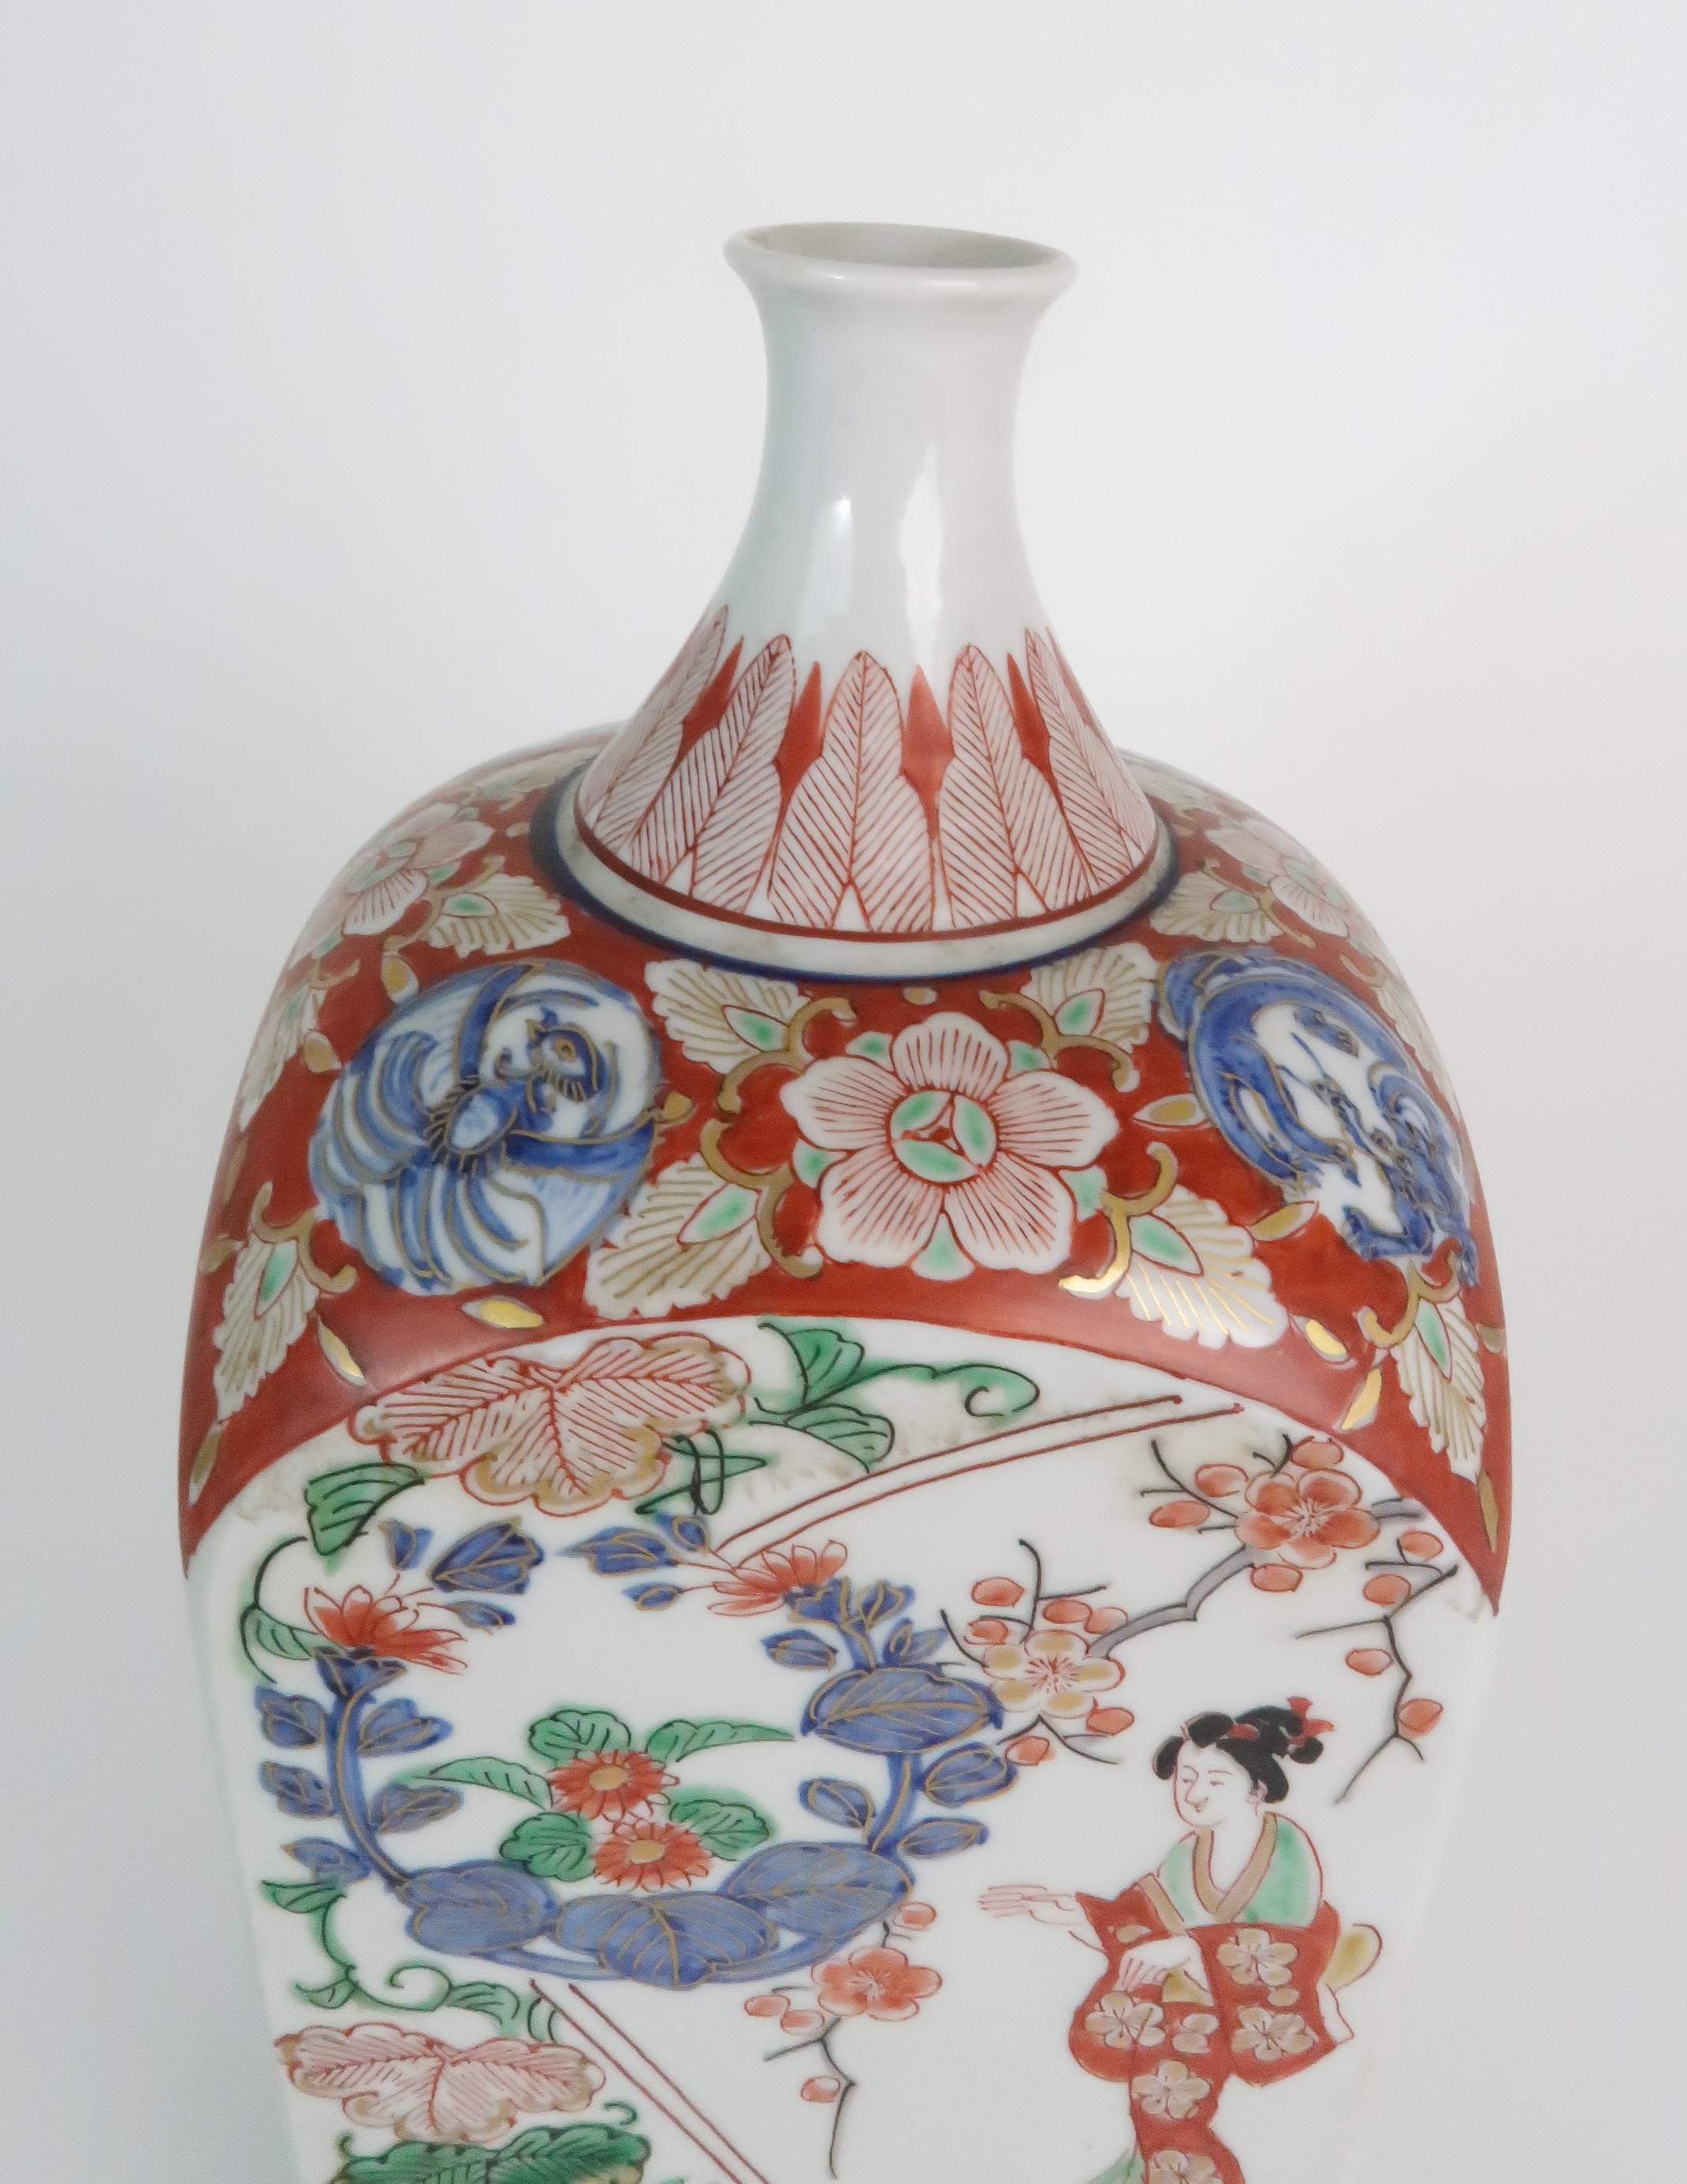 AN IMARI SQUARE BOTTLE VASE painted with panels of figures, bats and foliage, 29cm high, Chinese tea - Image 12 of 13